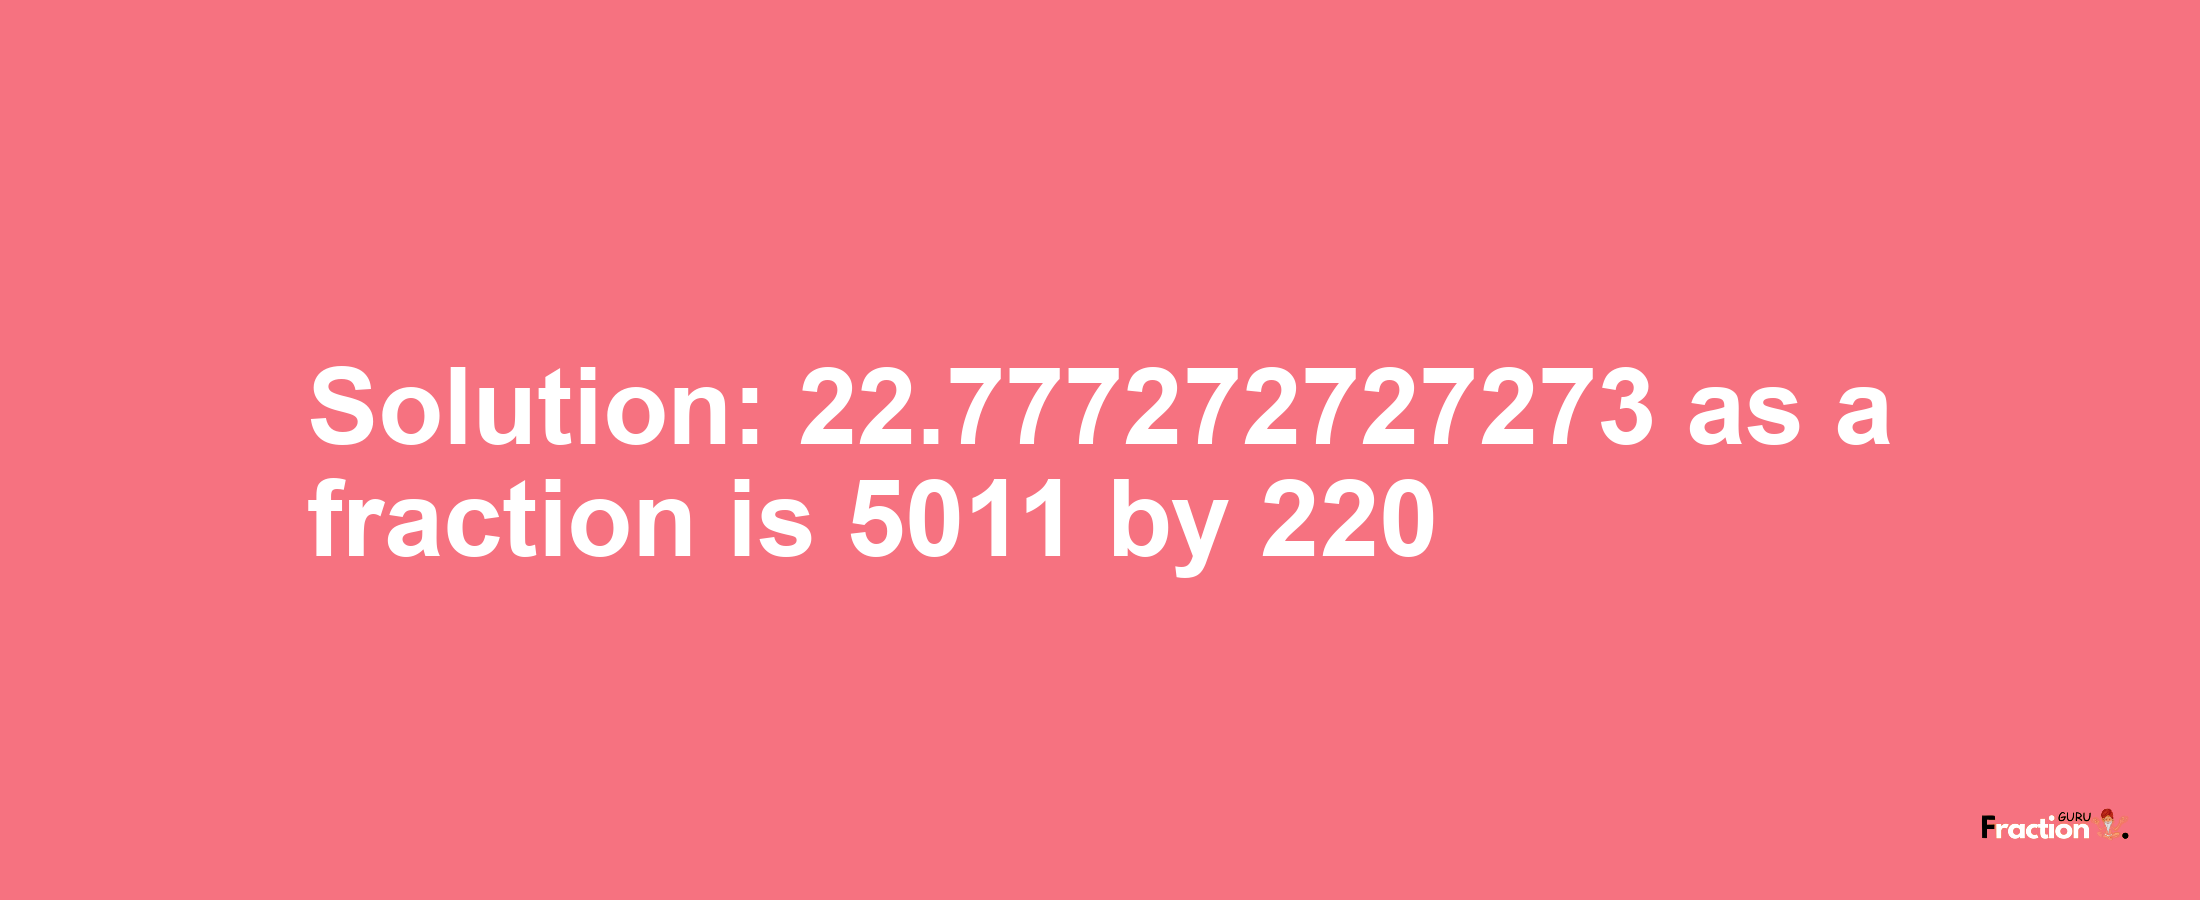 Solution:22.777272727273 as a fraction is 5011/220